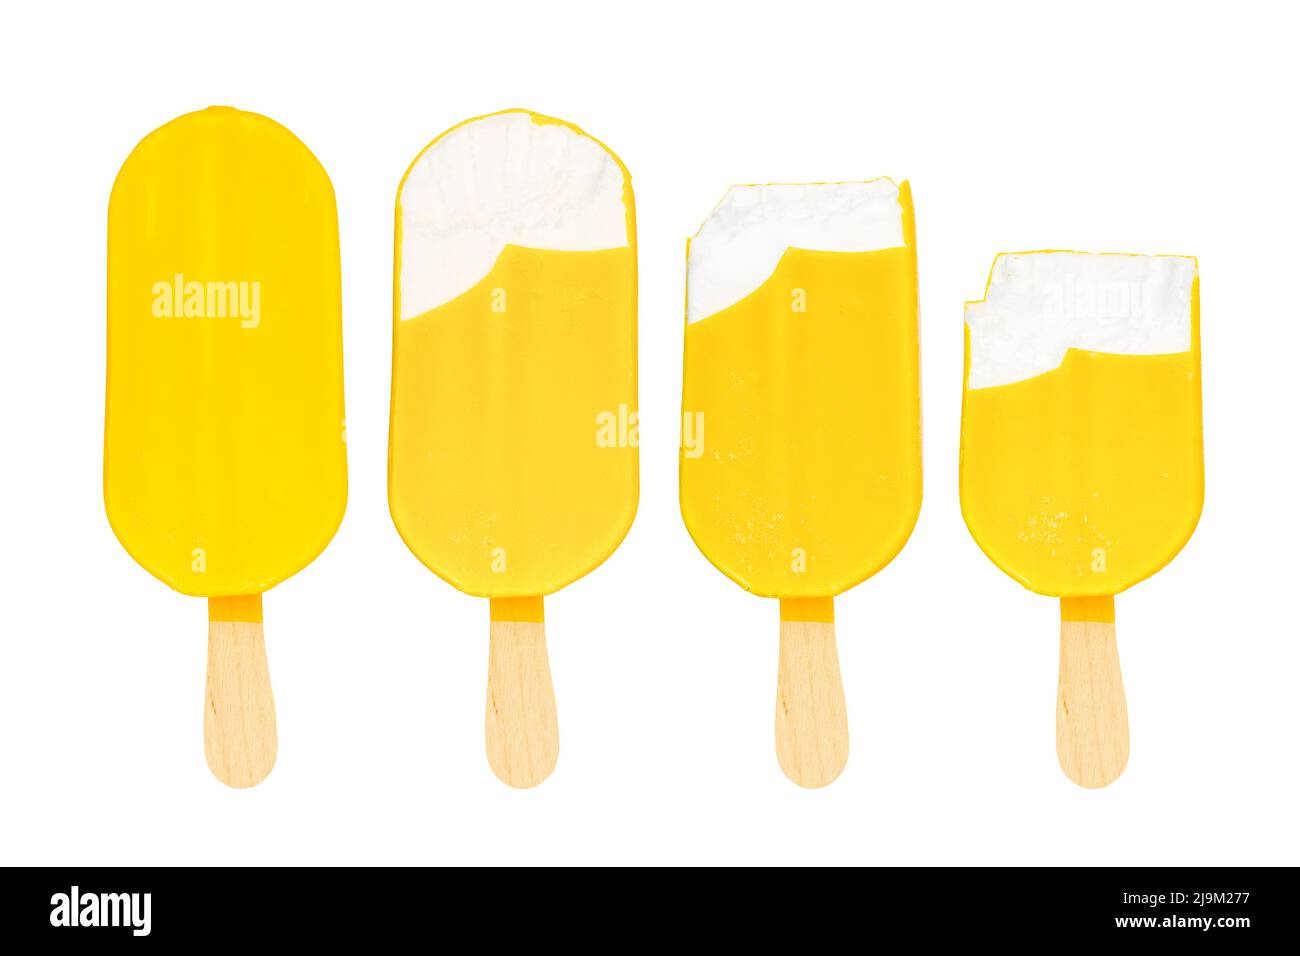 Bitten yellow ice cream bars arranged in a row, isolated on white background. Stock Photo